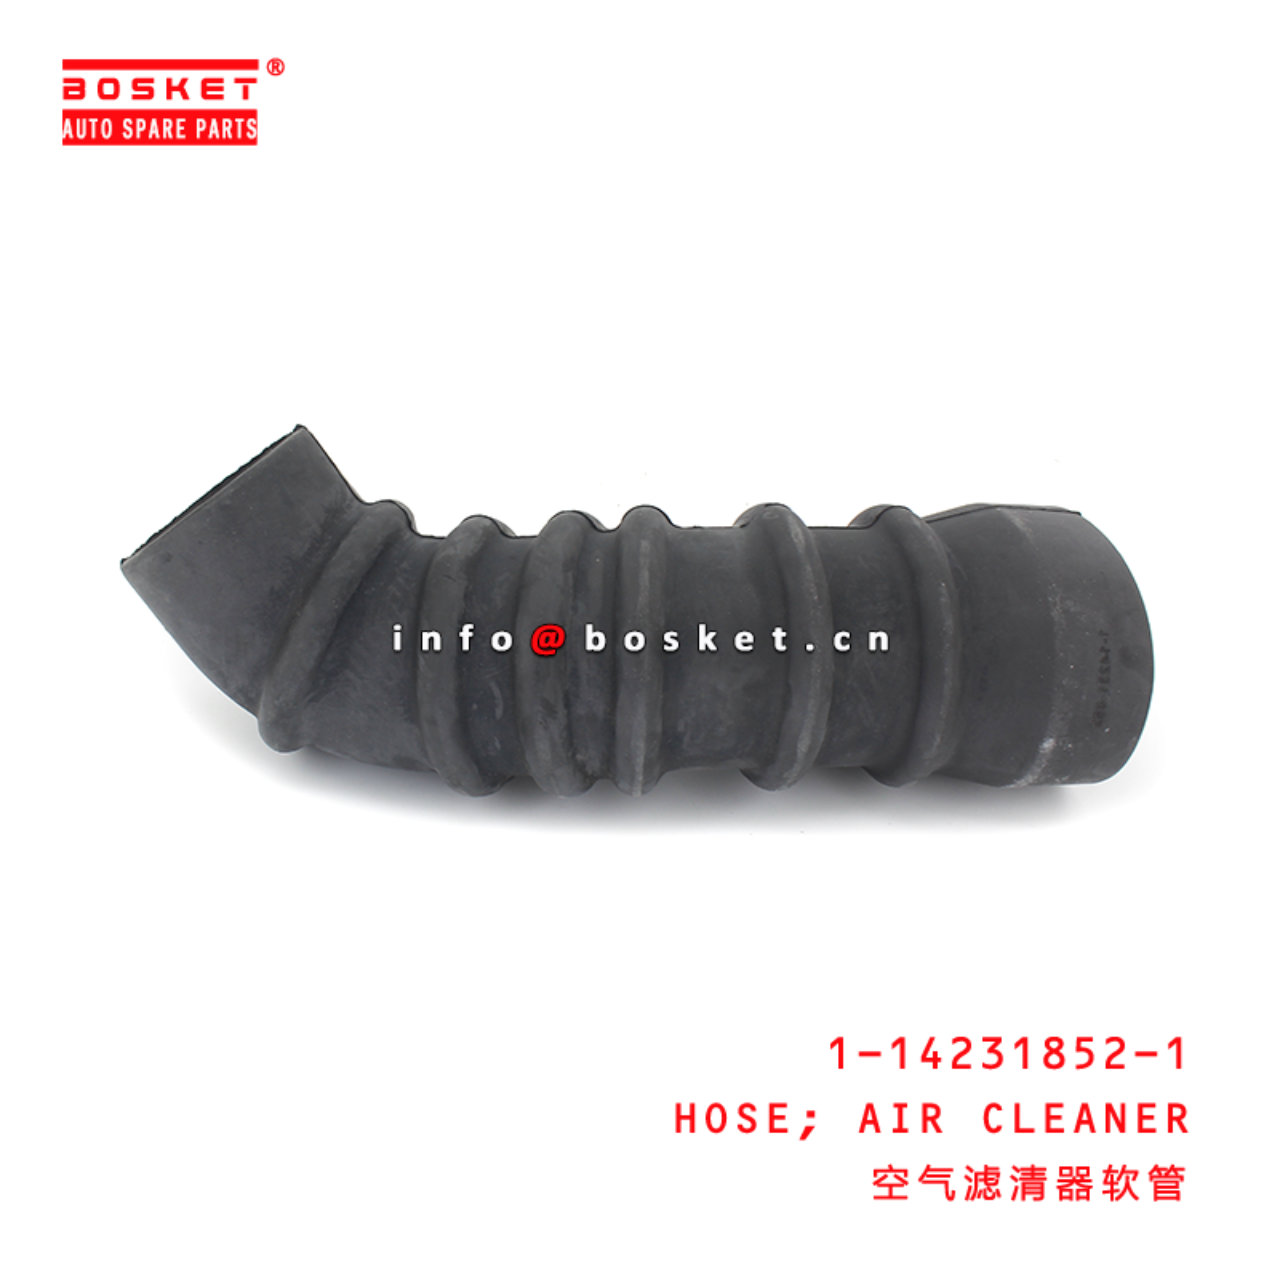 1-14231852-1 Air Cleaner Hose suitable for ISUZU FVR 6HH1 1142318521